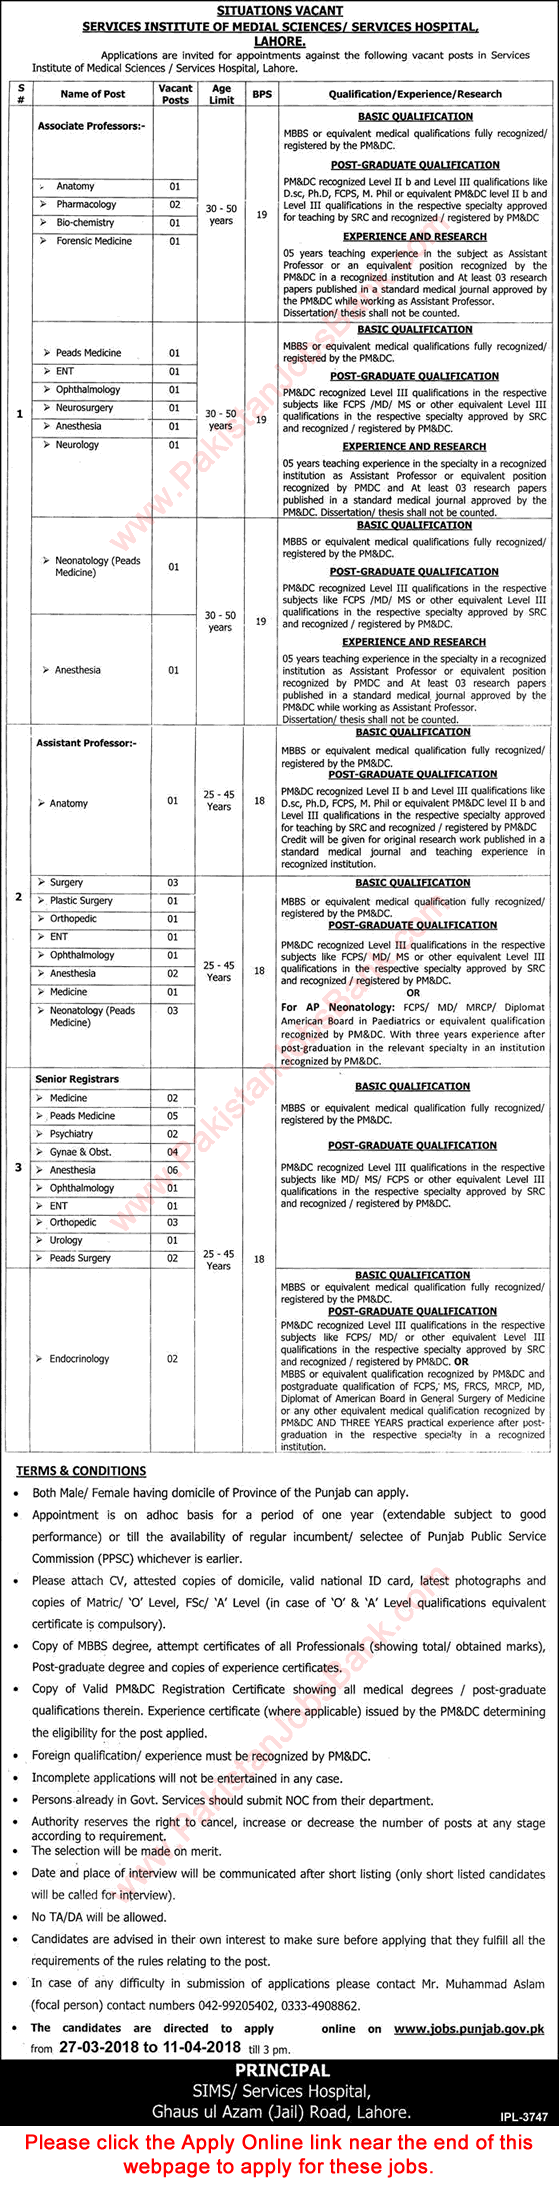 Services Hospital Lahore Jobs 2018 March Apply Online Teaching Faculty Services Institute of Medical Sciences Latest